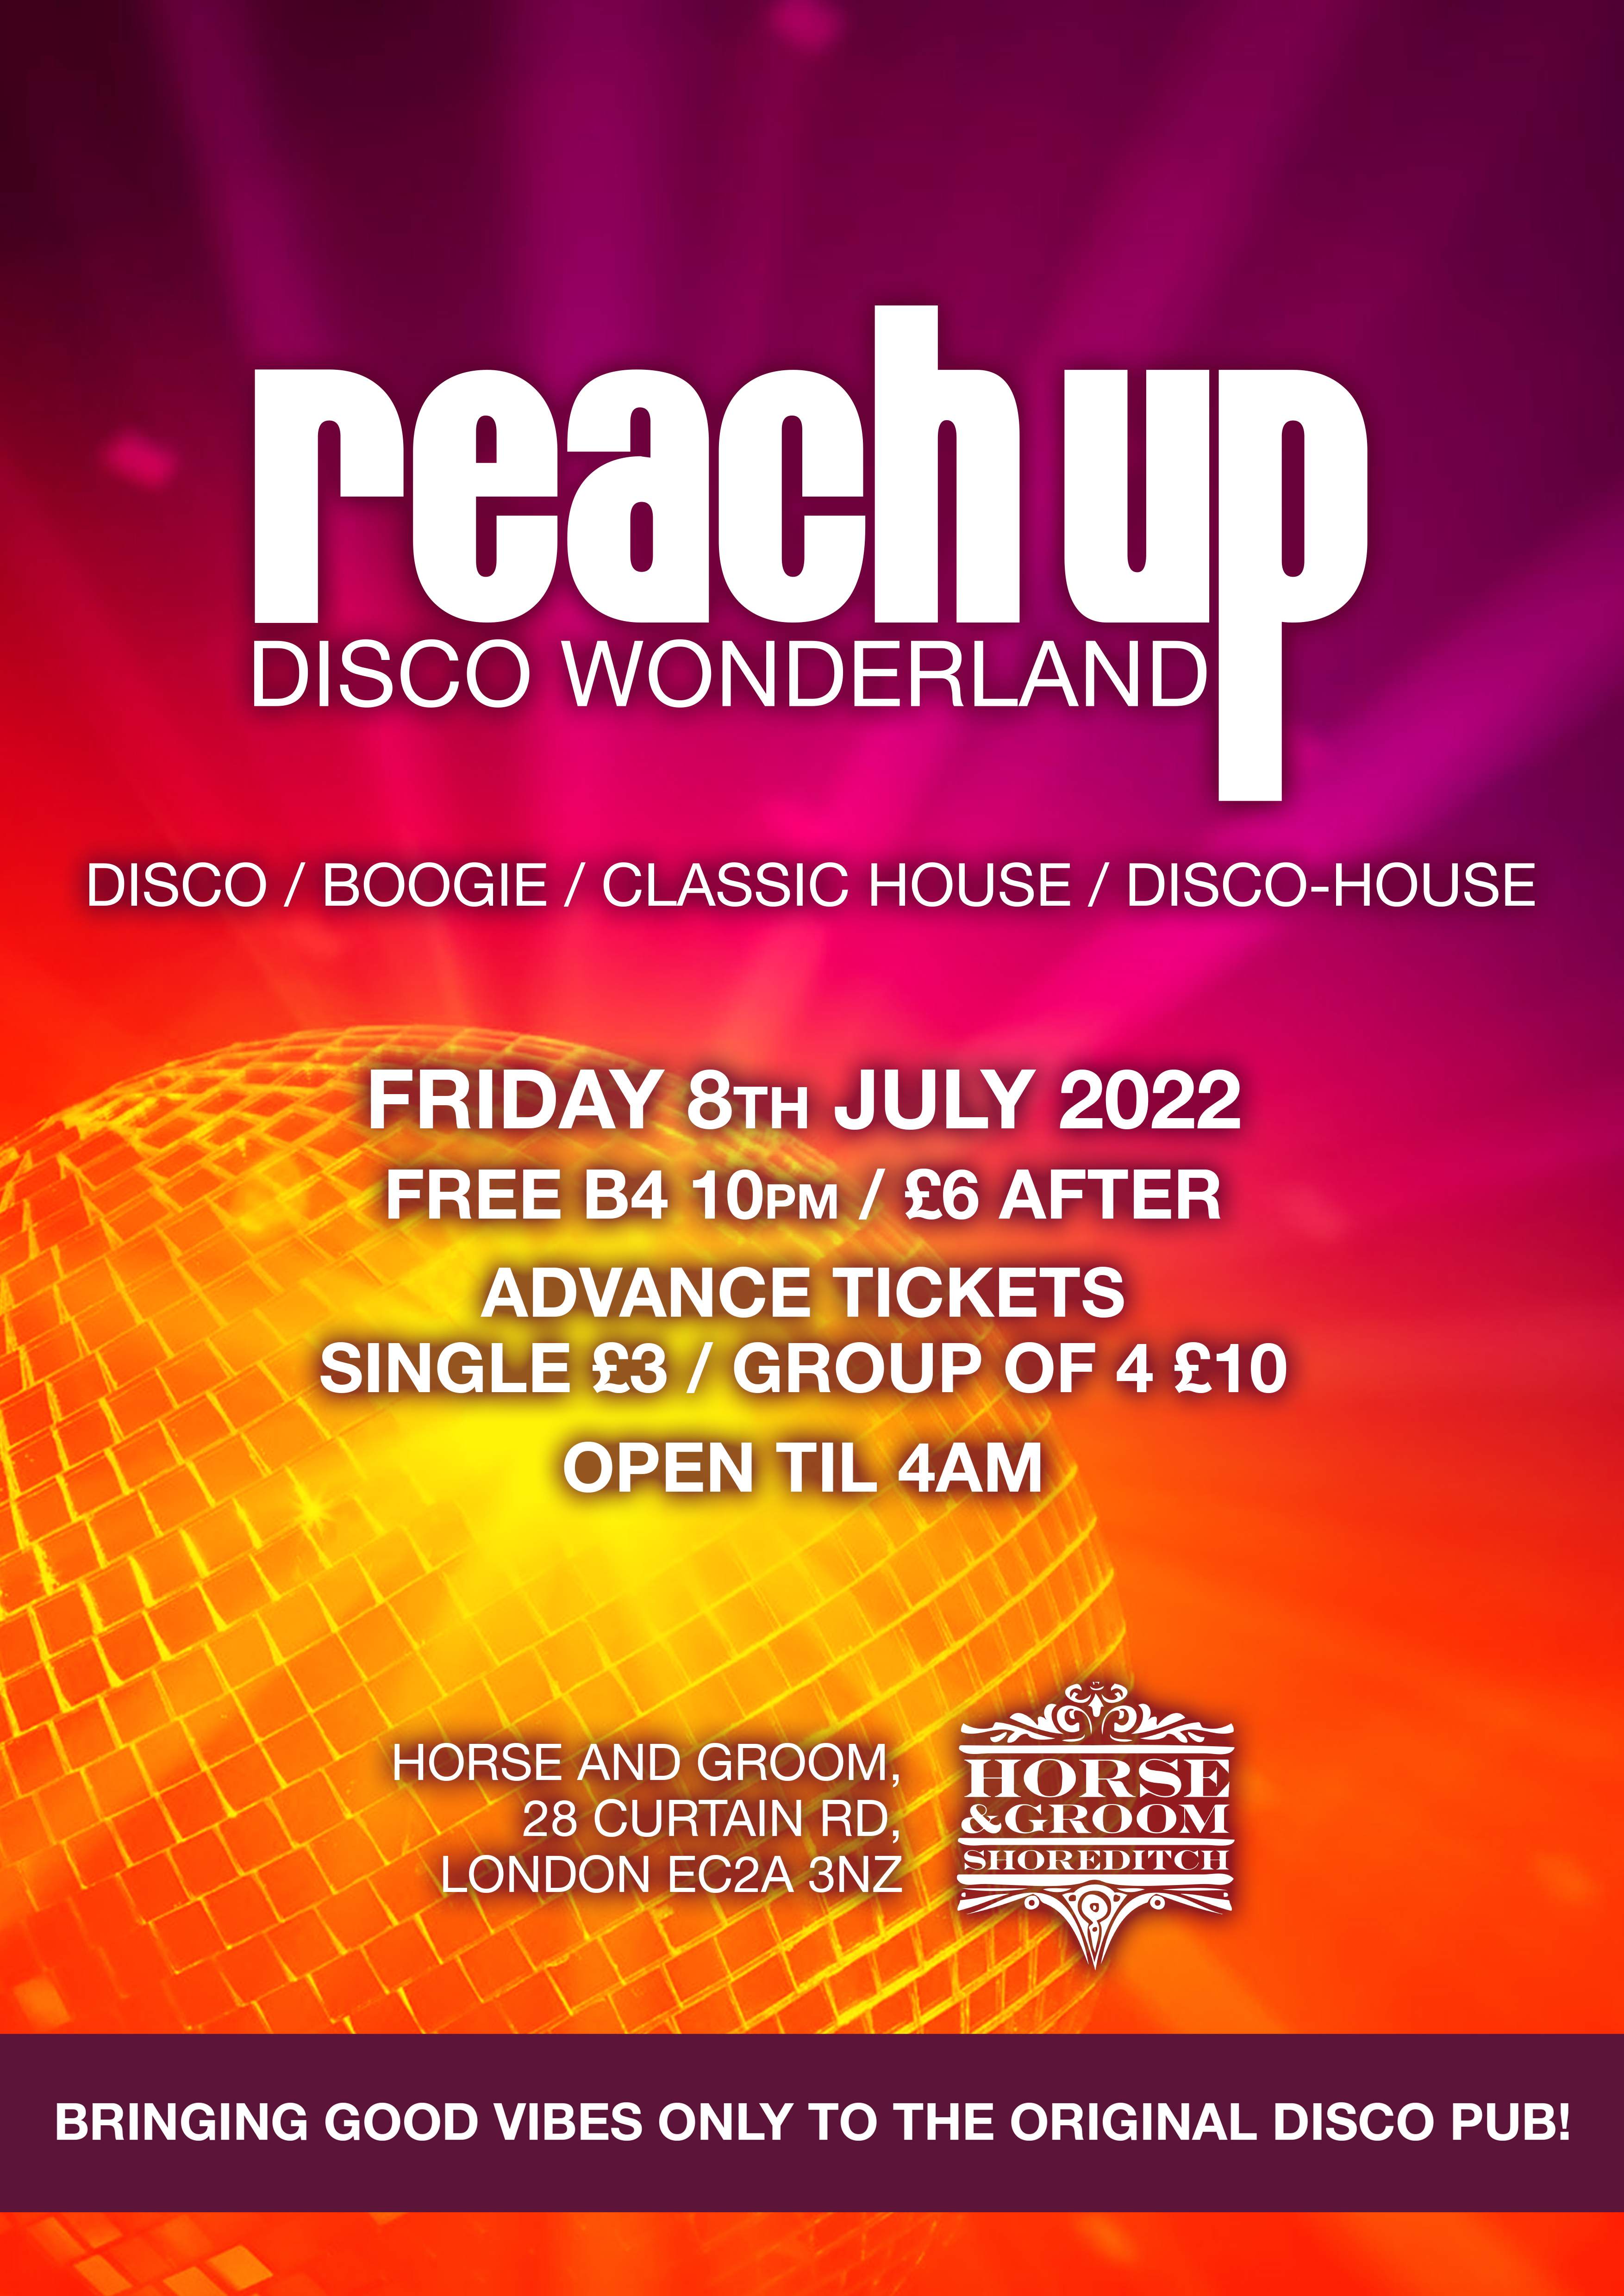 Reach Up Disco Wonderland with Andy Smith & Nick 'Reach Up' - Página frontal